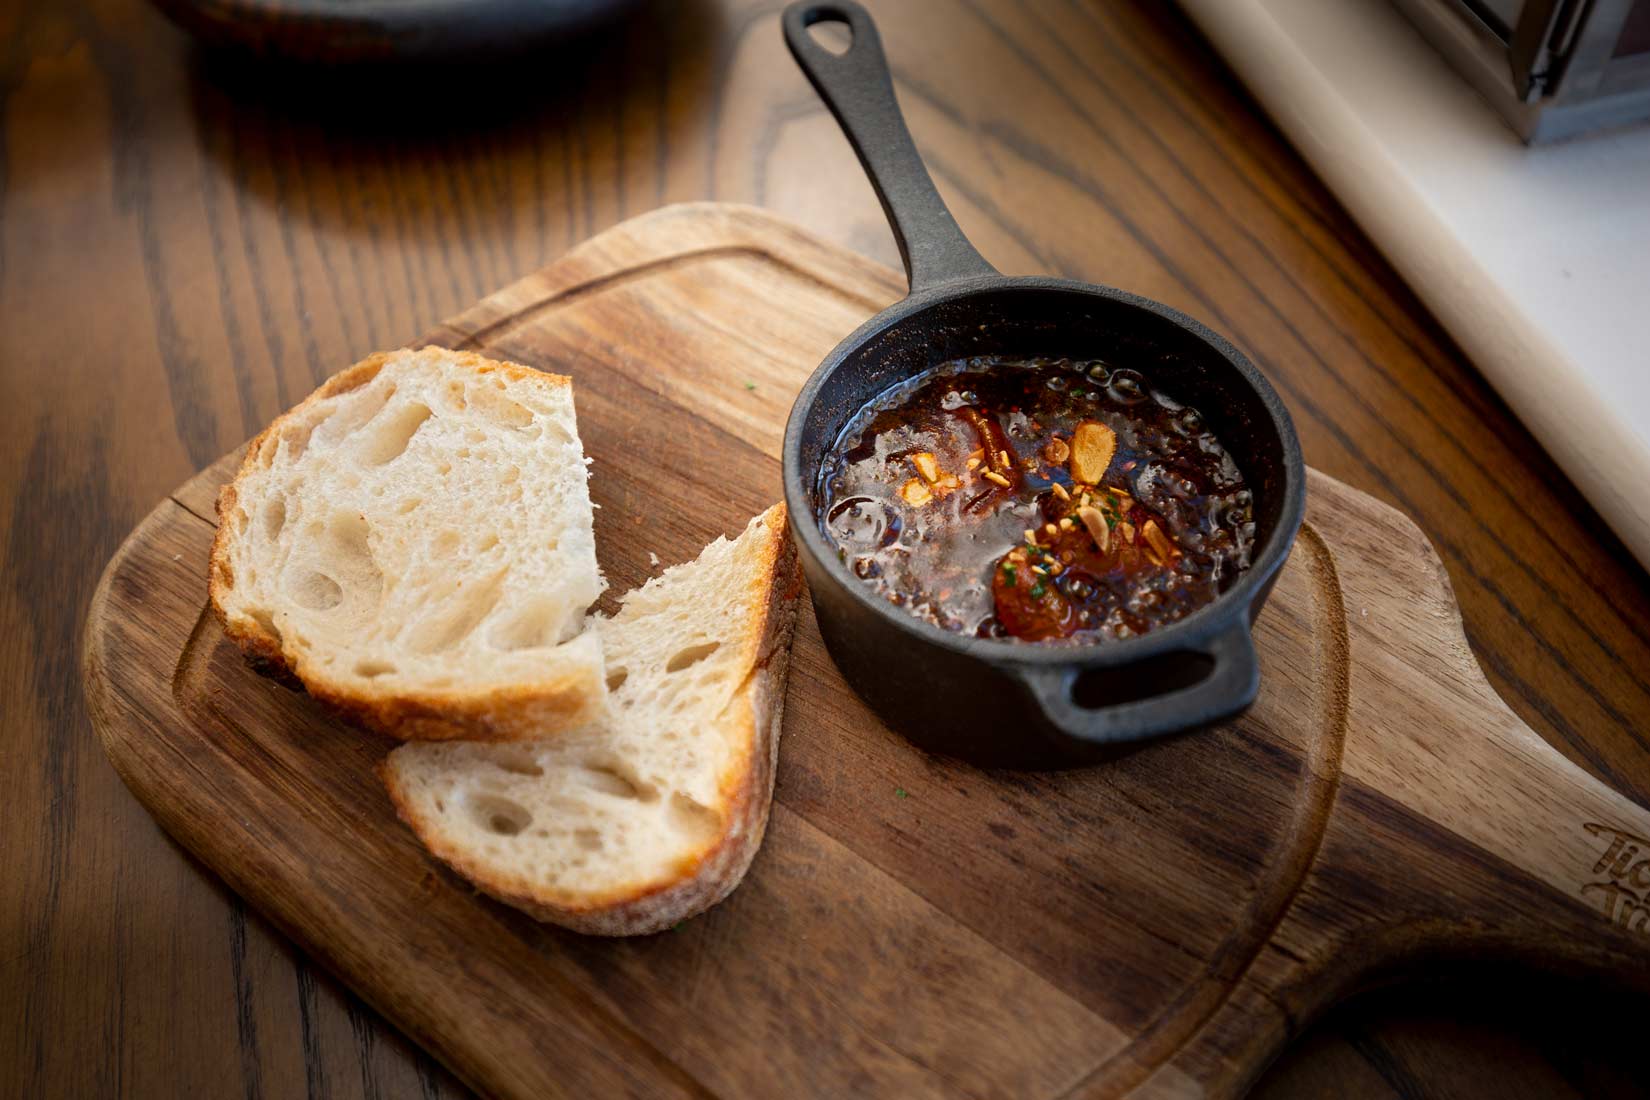 Bread and iron skillet in a cheese board with dramtic lighting